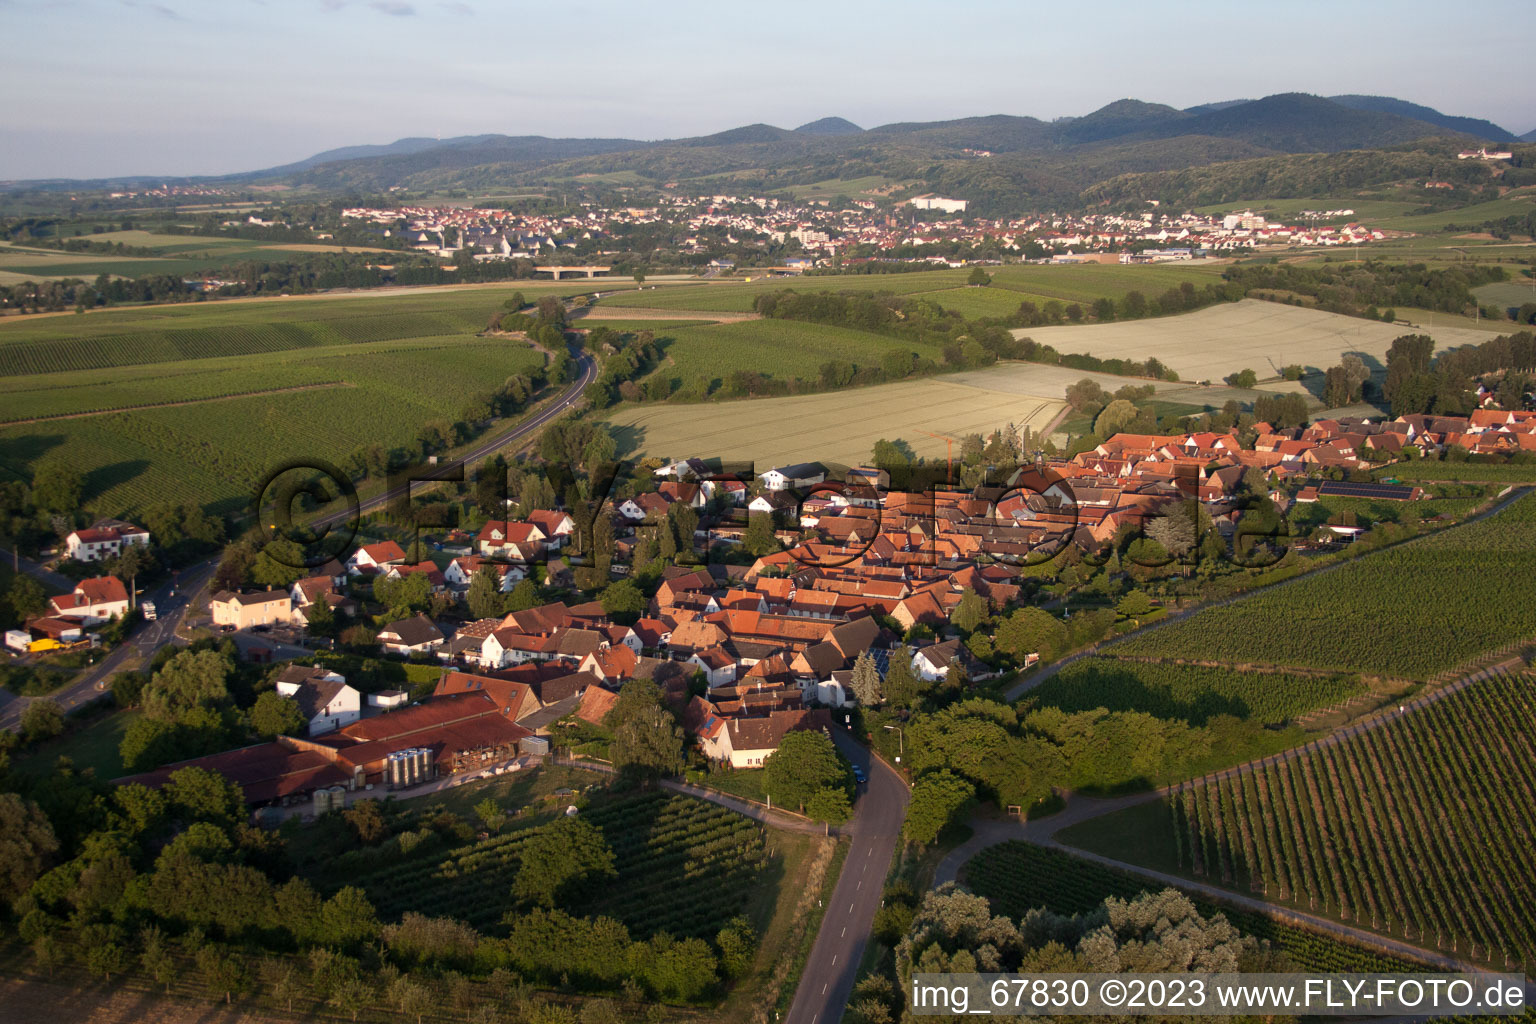 Niederhorbach in the state Rhineland-Palatinate, Germany from the drone perspective